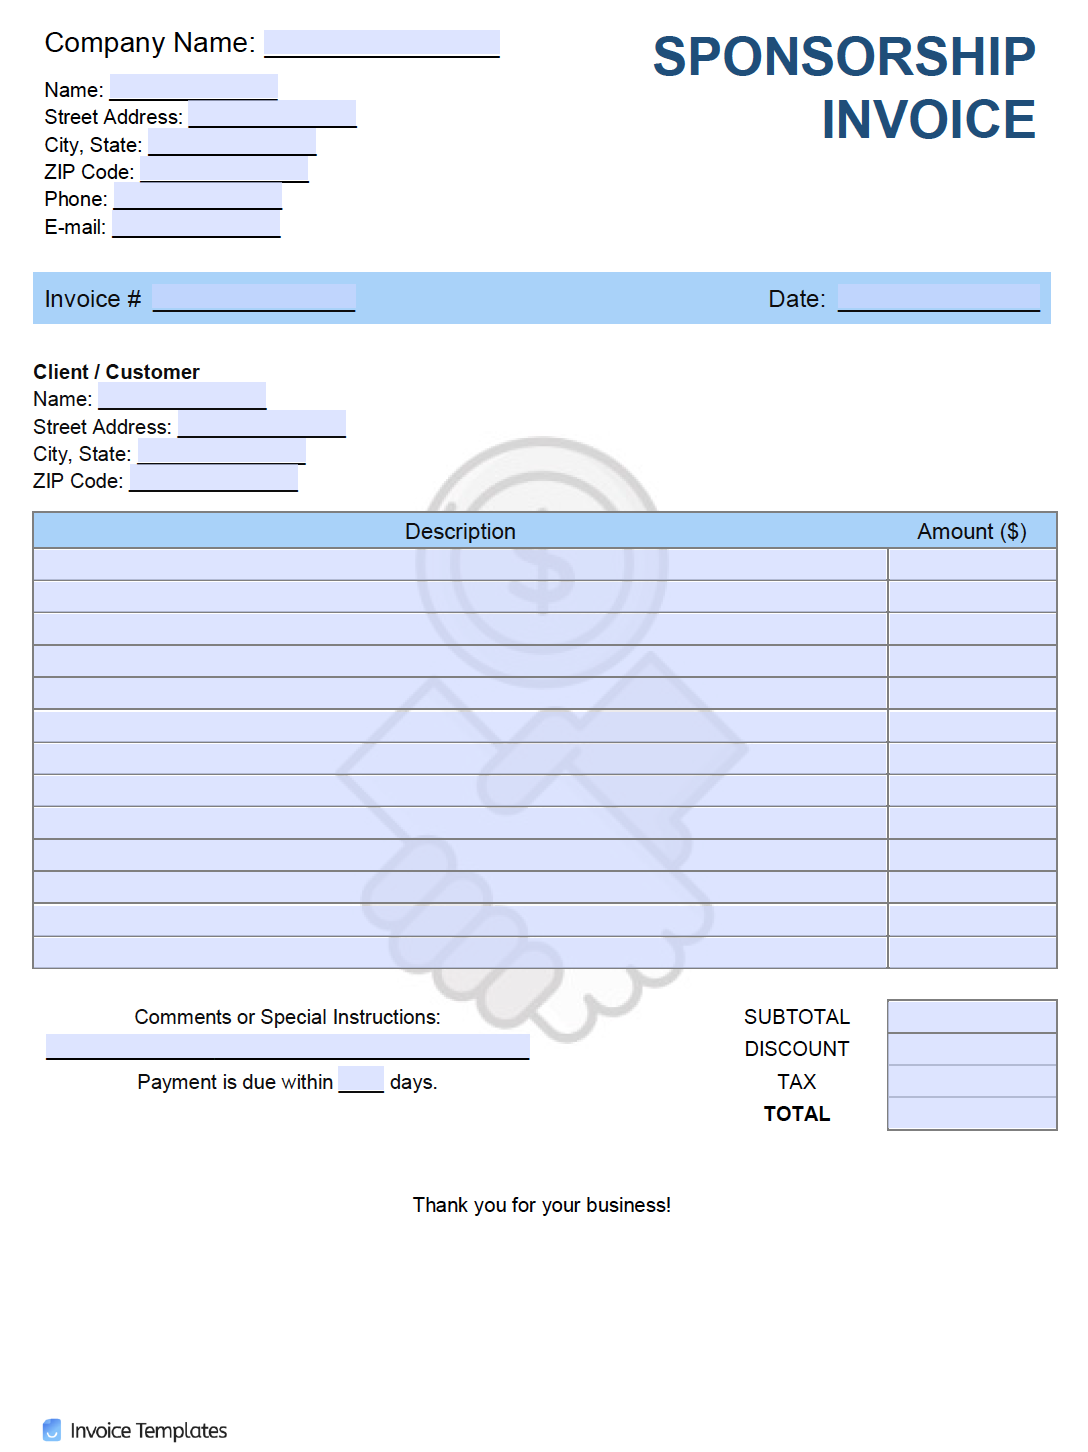 Free Sponsorship Invoice Template  PDF  WORD  EXCEL With Blank Sponsor Form Template Free